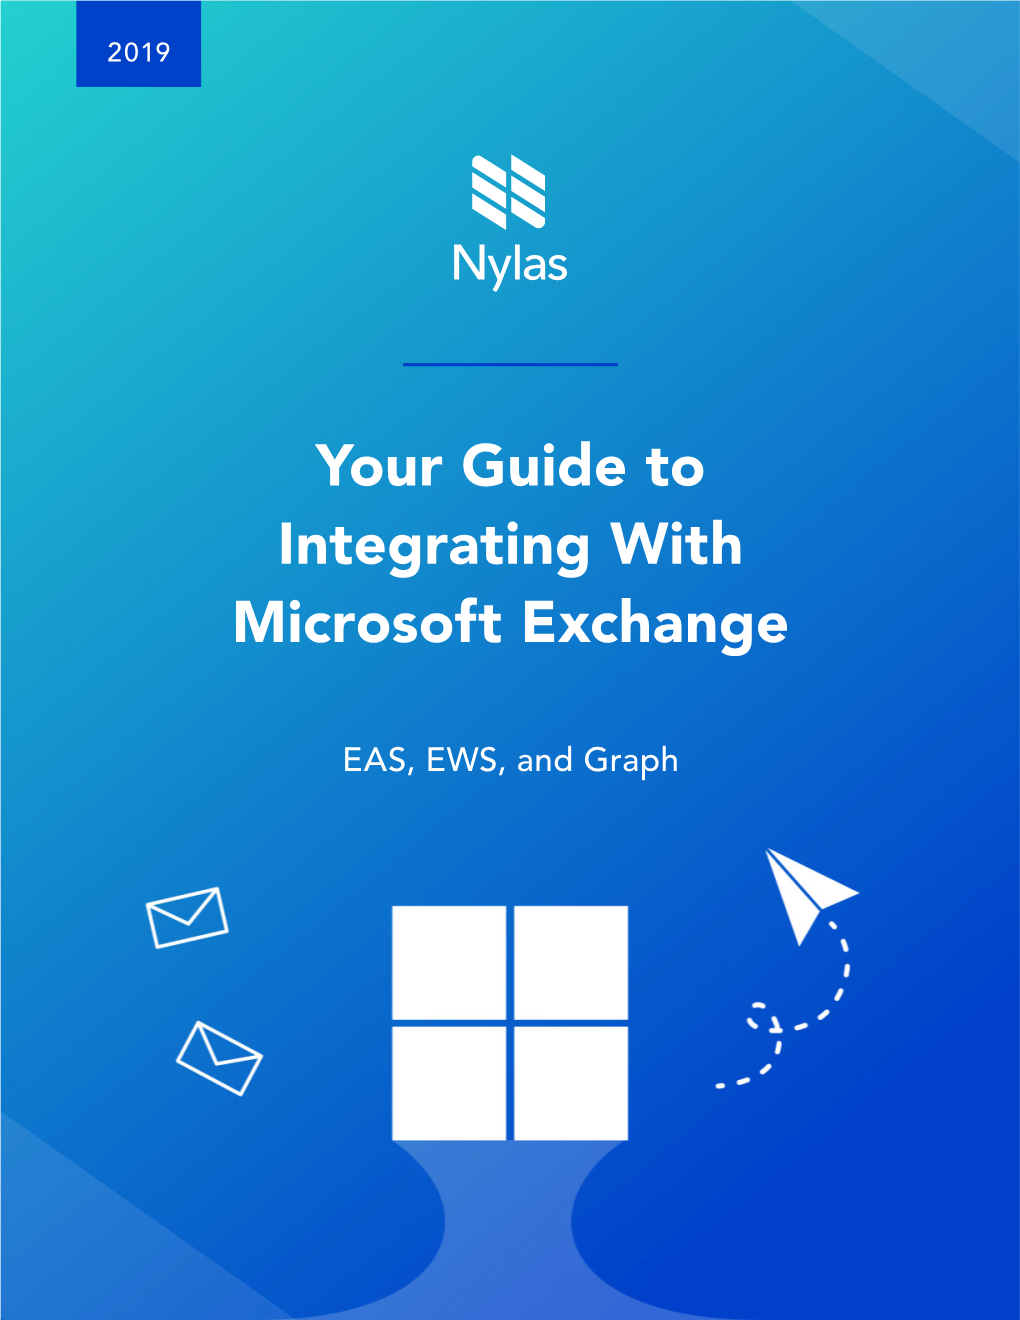 Your Guide to Integrating with Microsoft Exchange